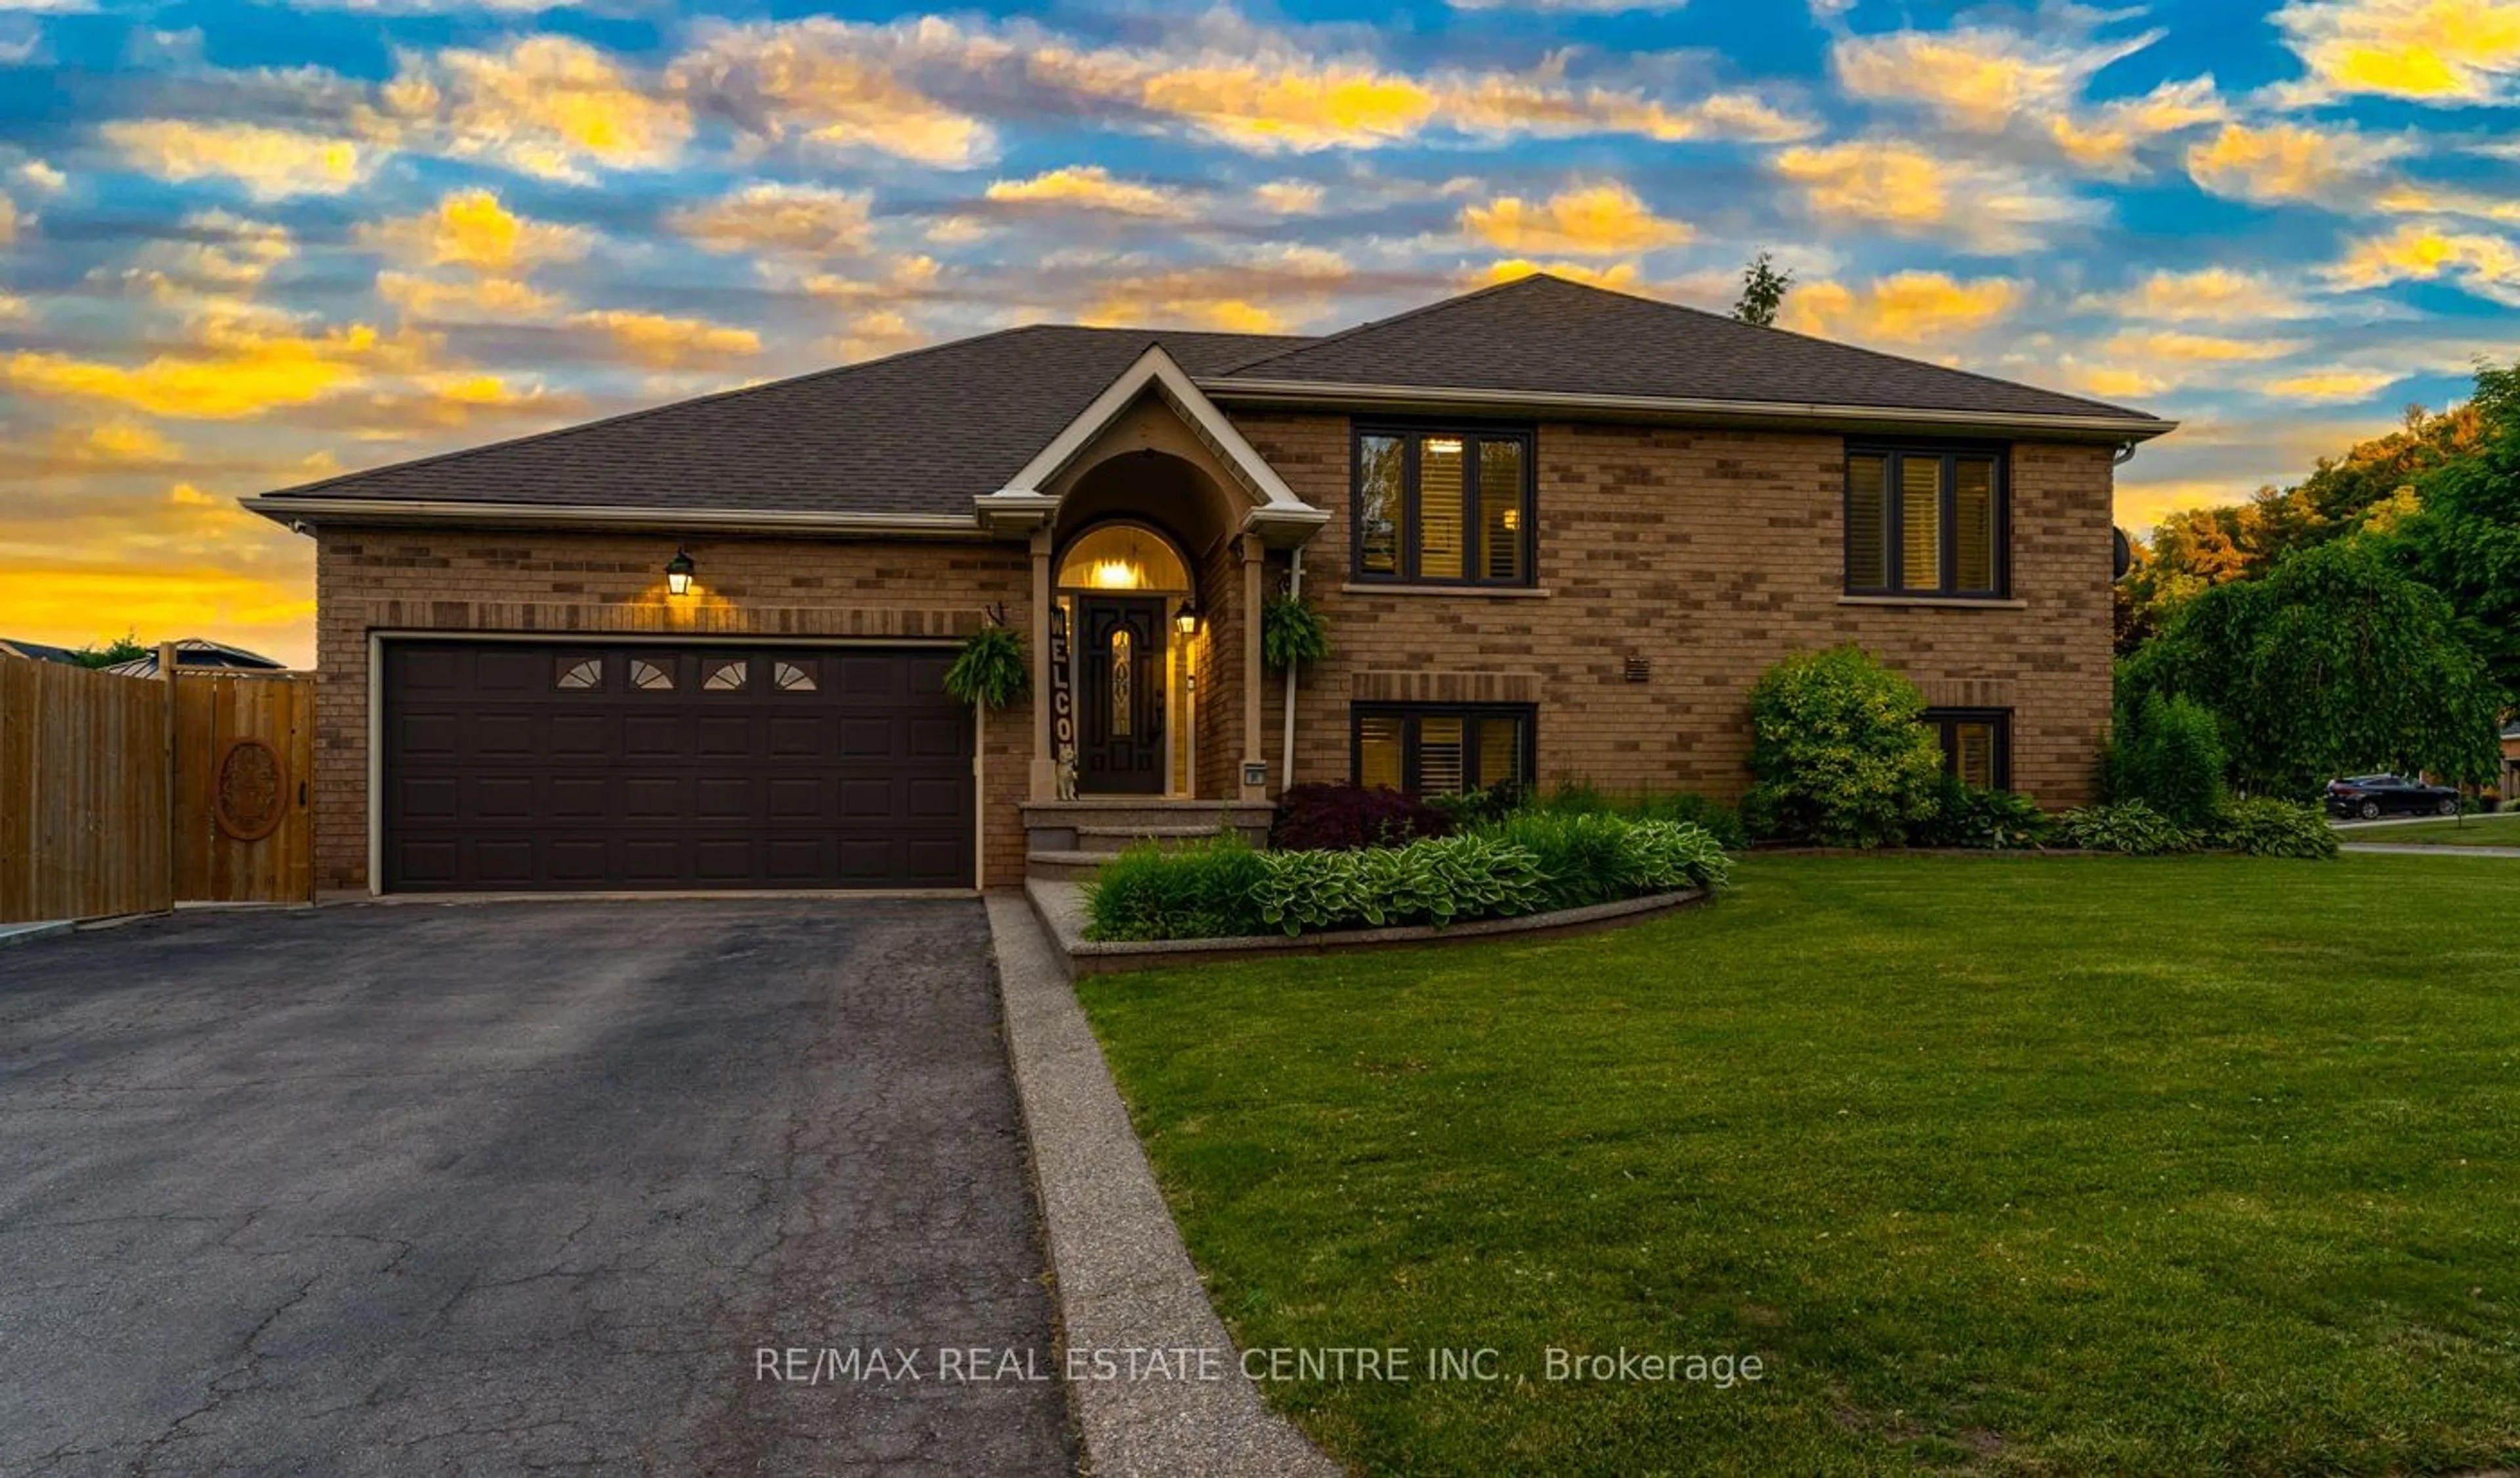 Home with brick exterior material for 91 Hedge Lawn Dr, Grimsby Ontario L3M 5H4